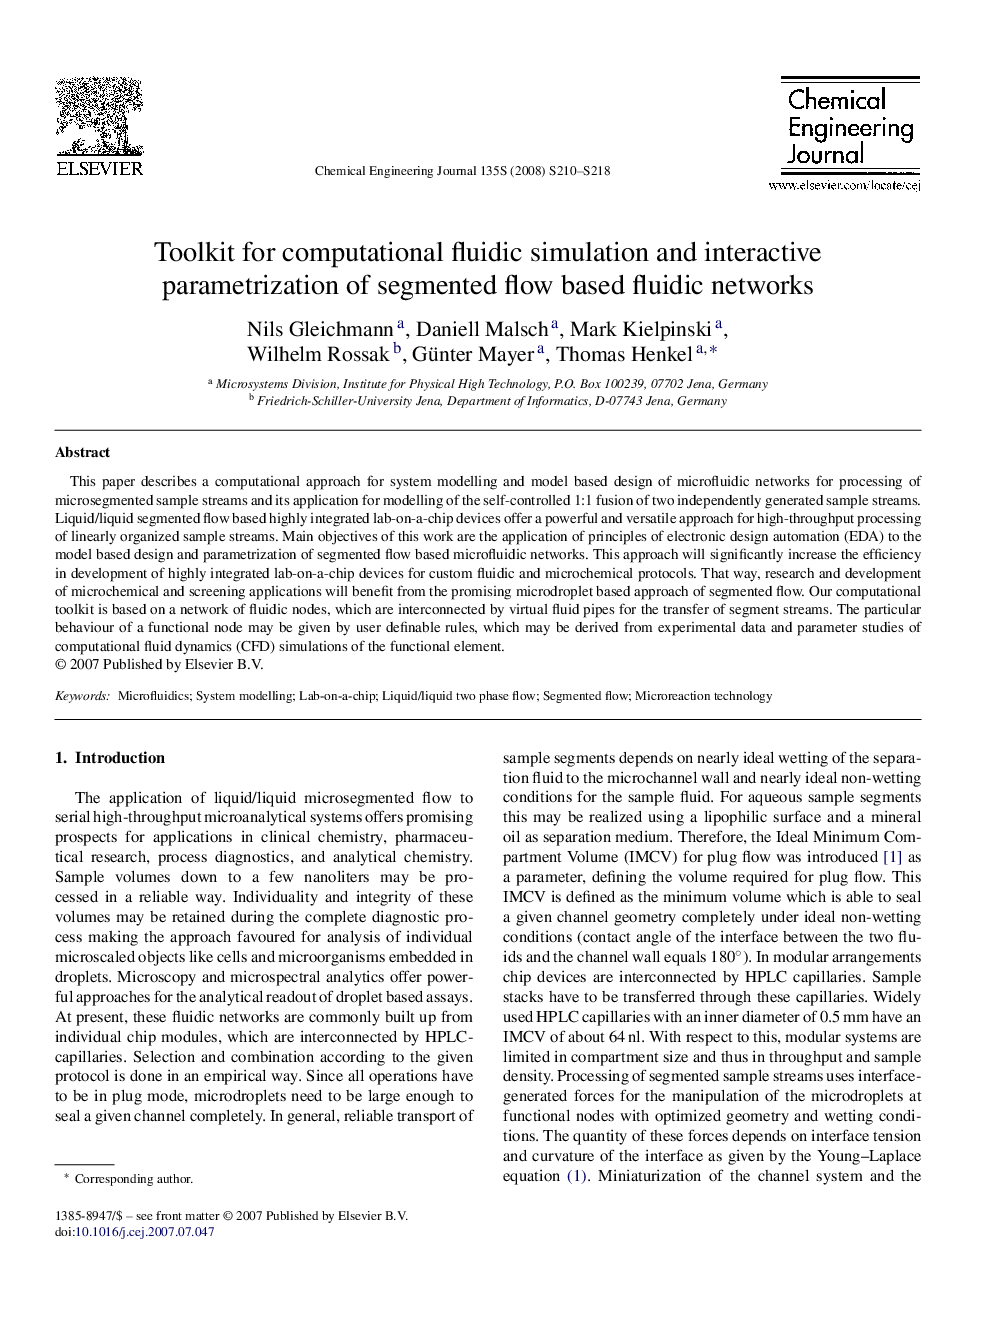 Toolkit for computational fluidic simulation and interactive parametrization of segmented flow based fluidic networks